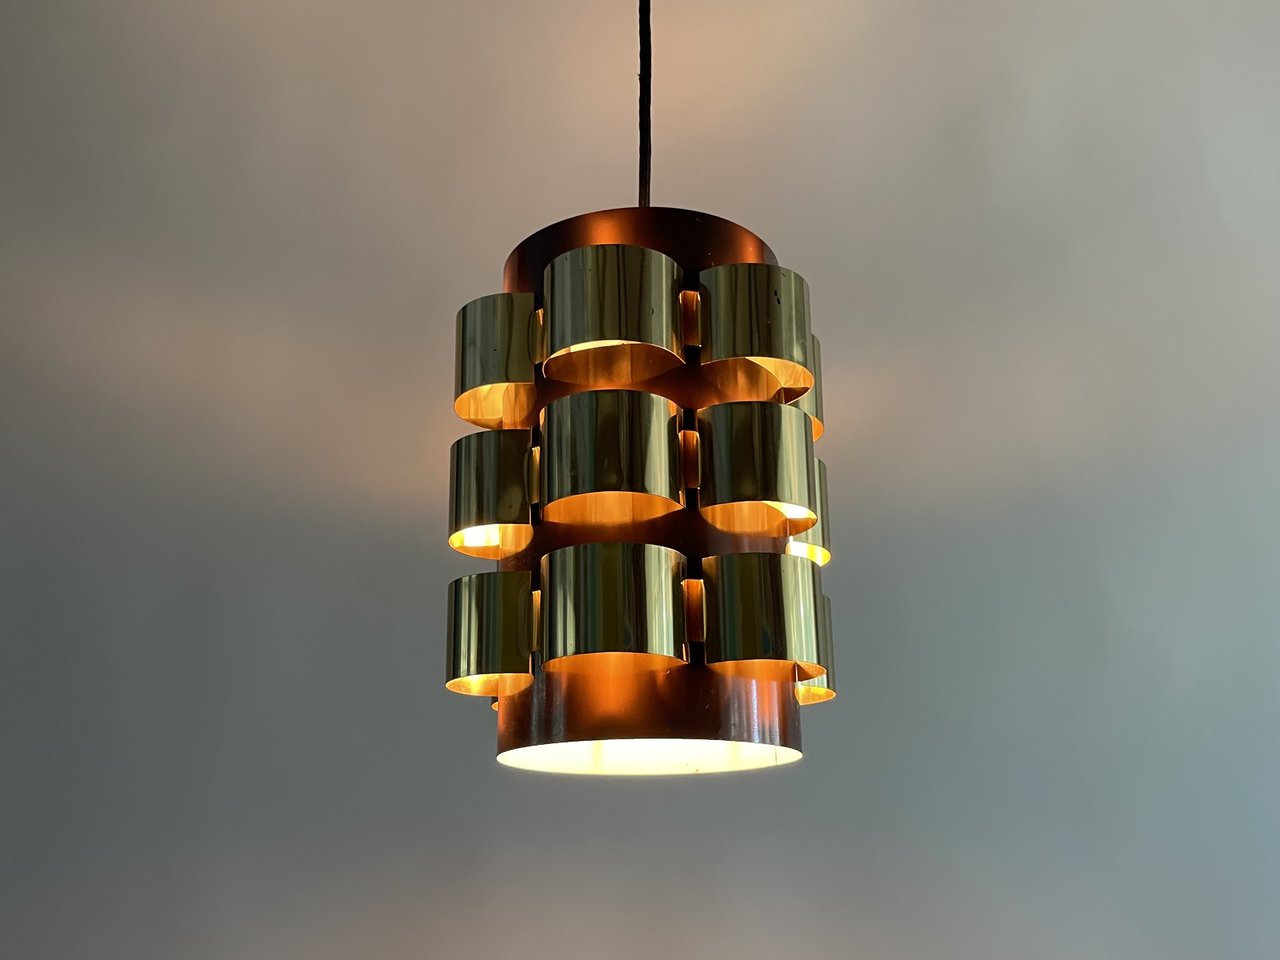 Image 5 of Werner Schou Coronell Hanging Lamp